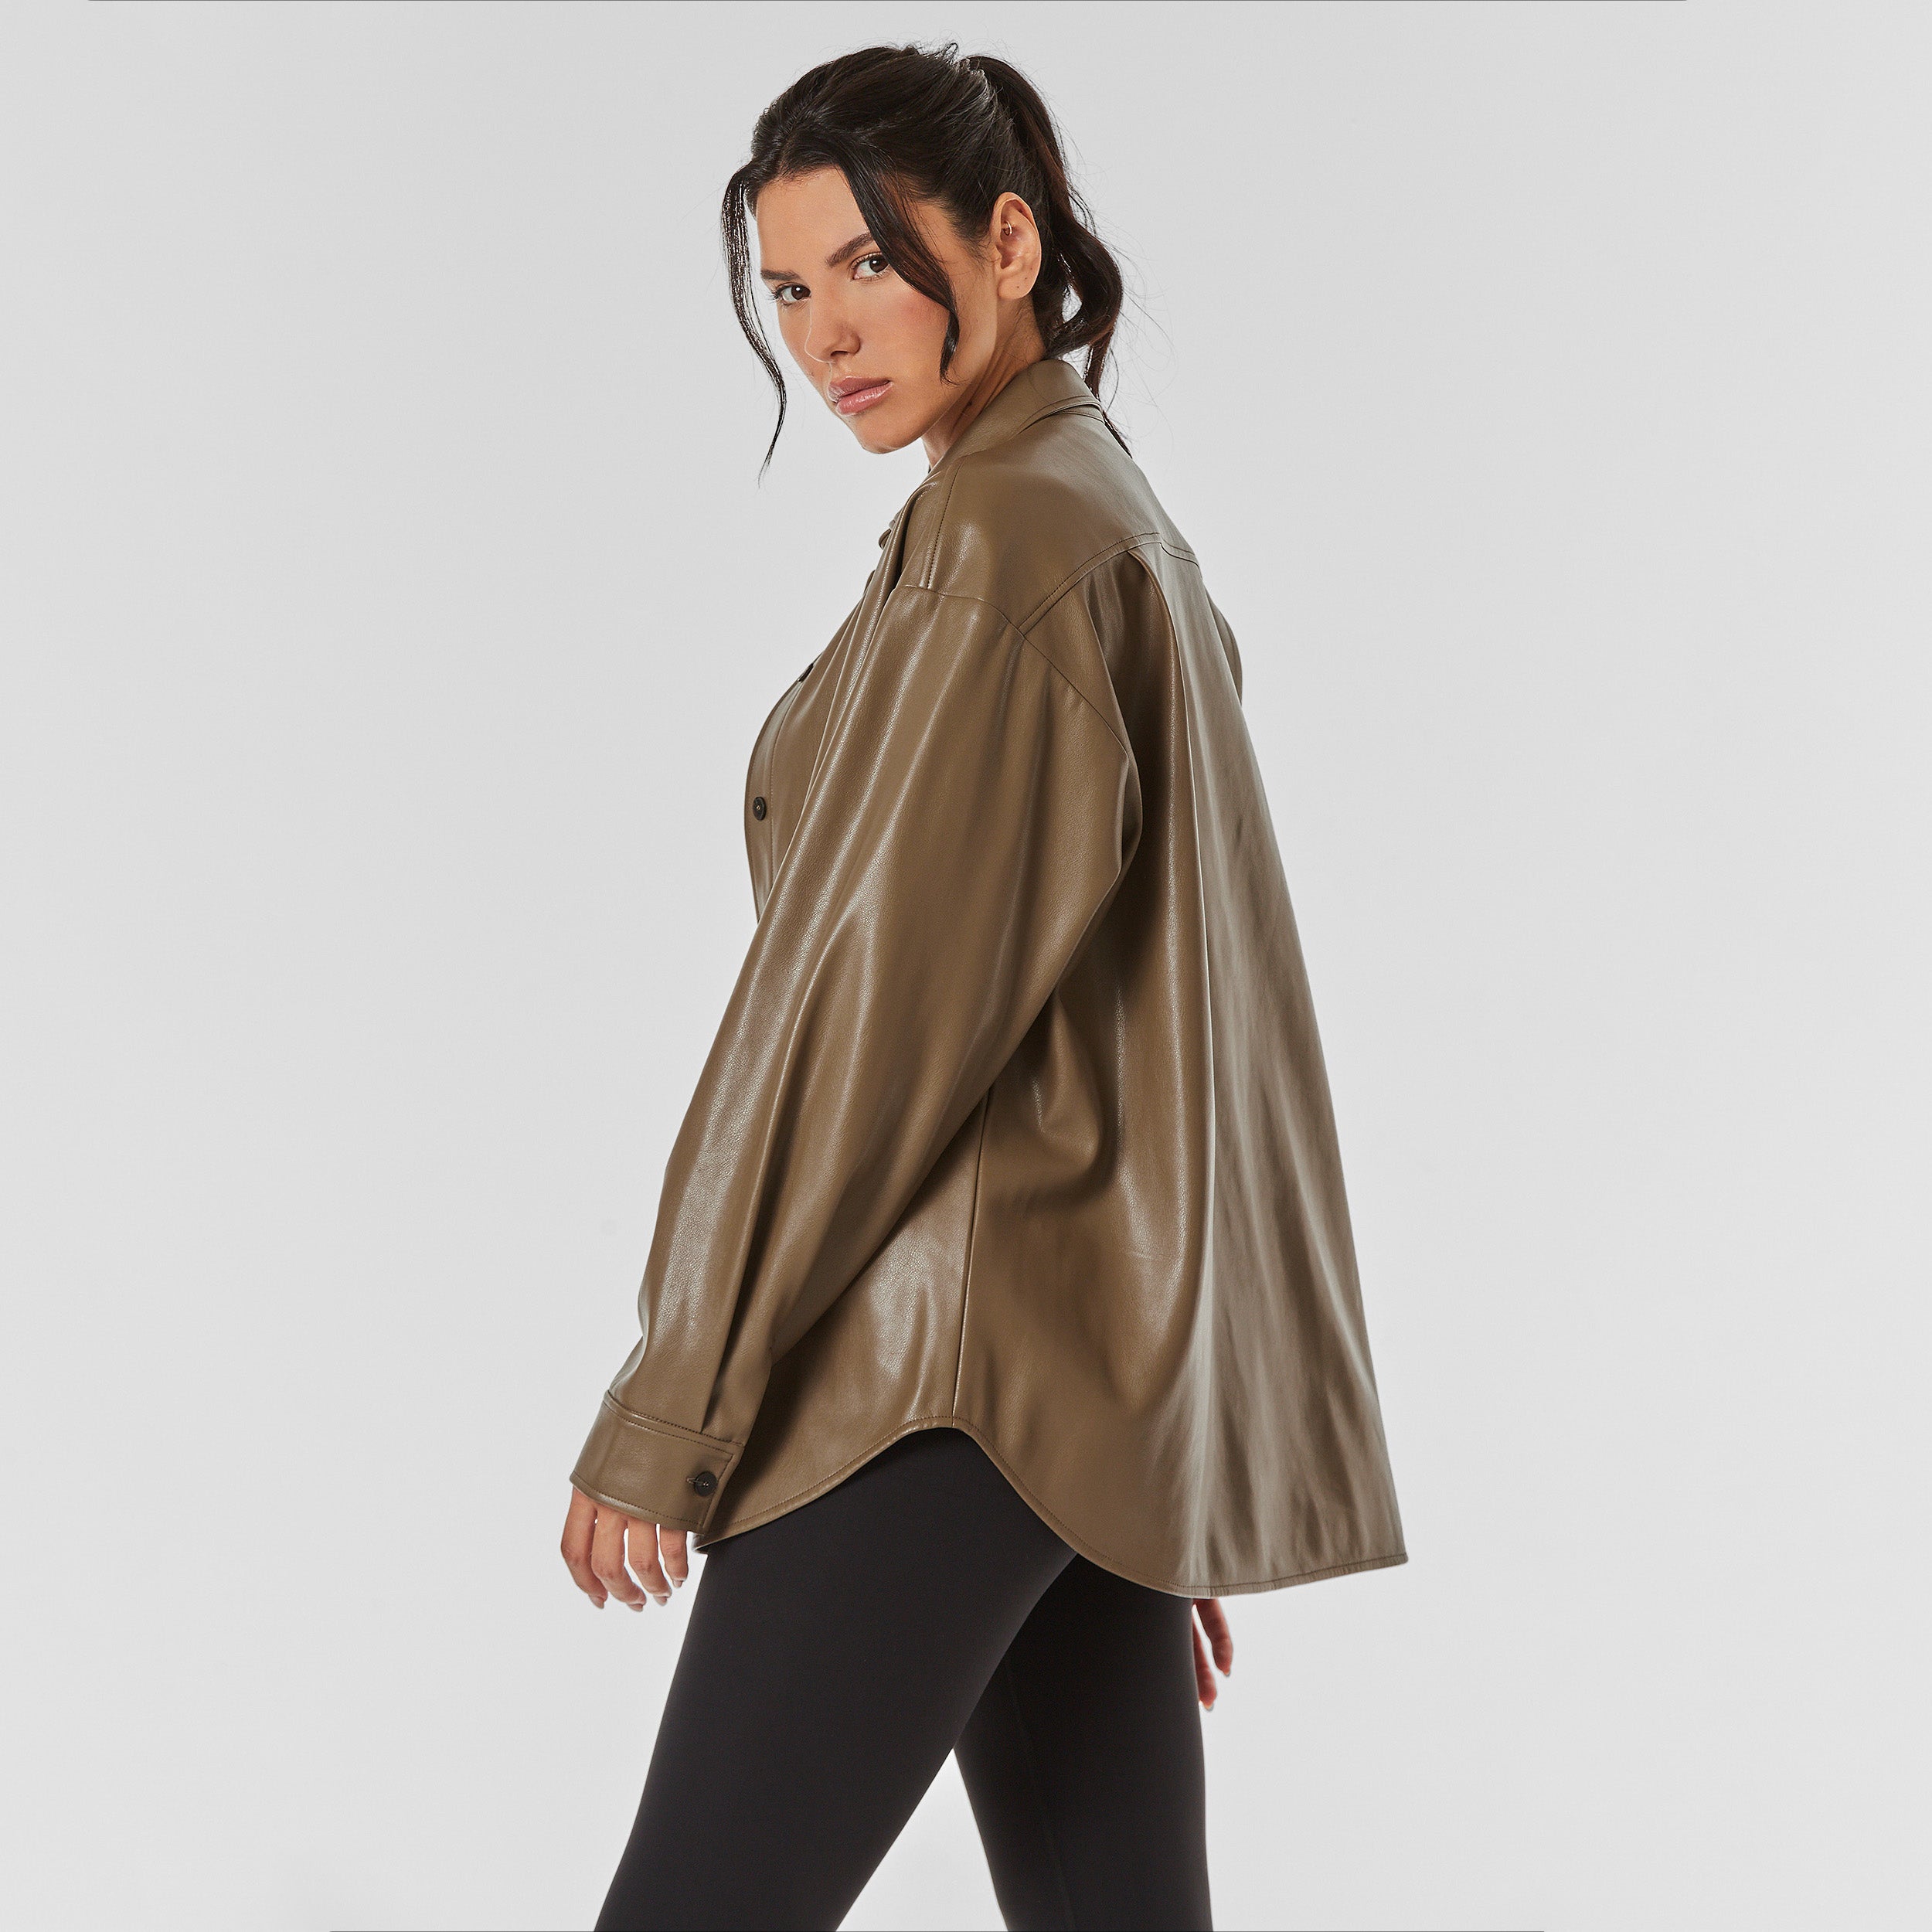 Side view of woman wearing brown faux leather oversized shirt jacket.